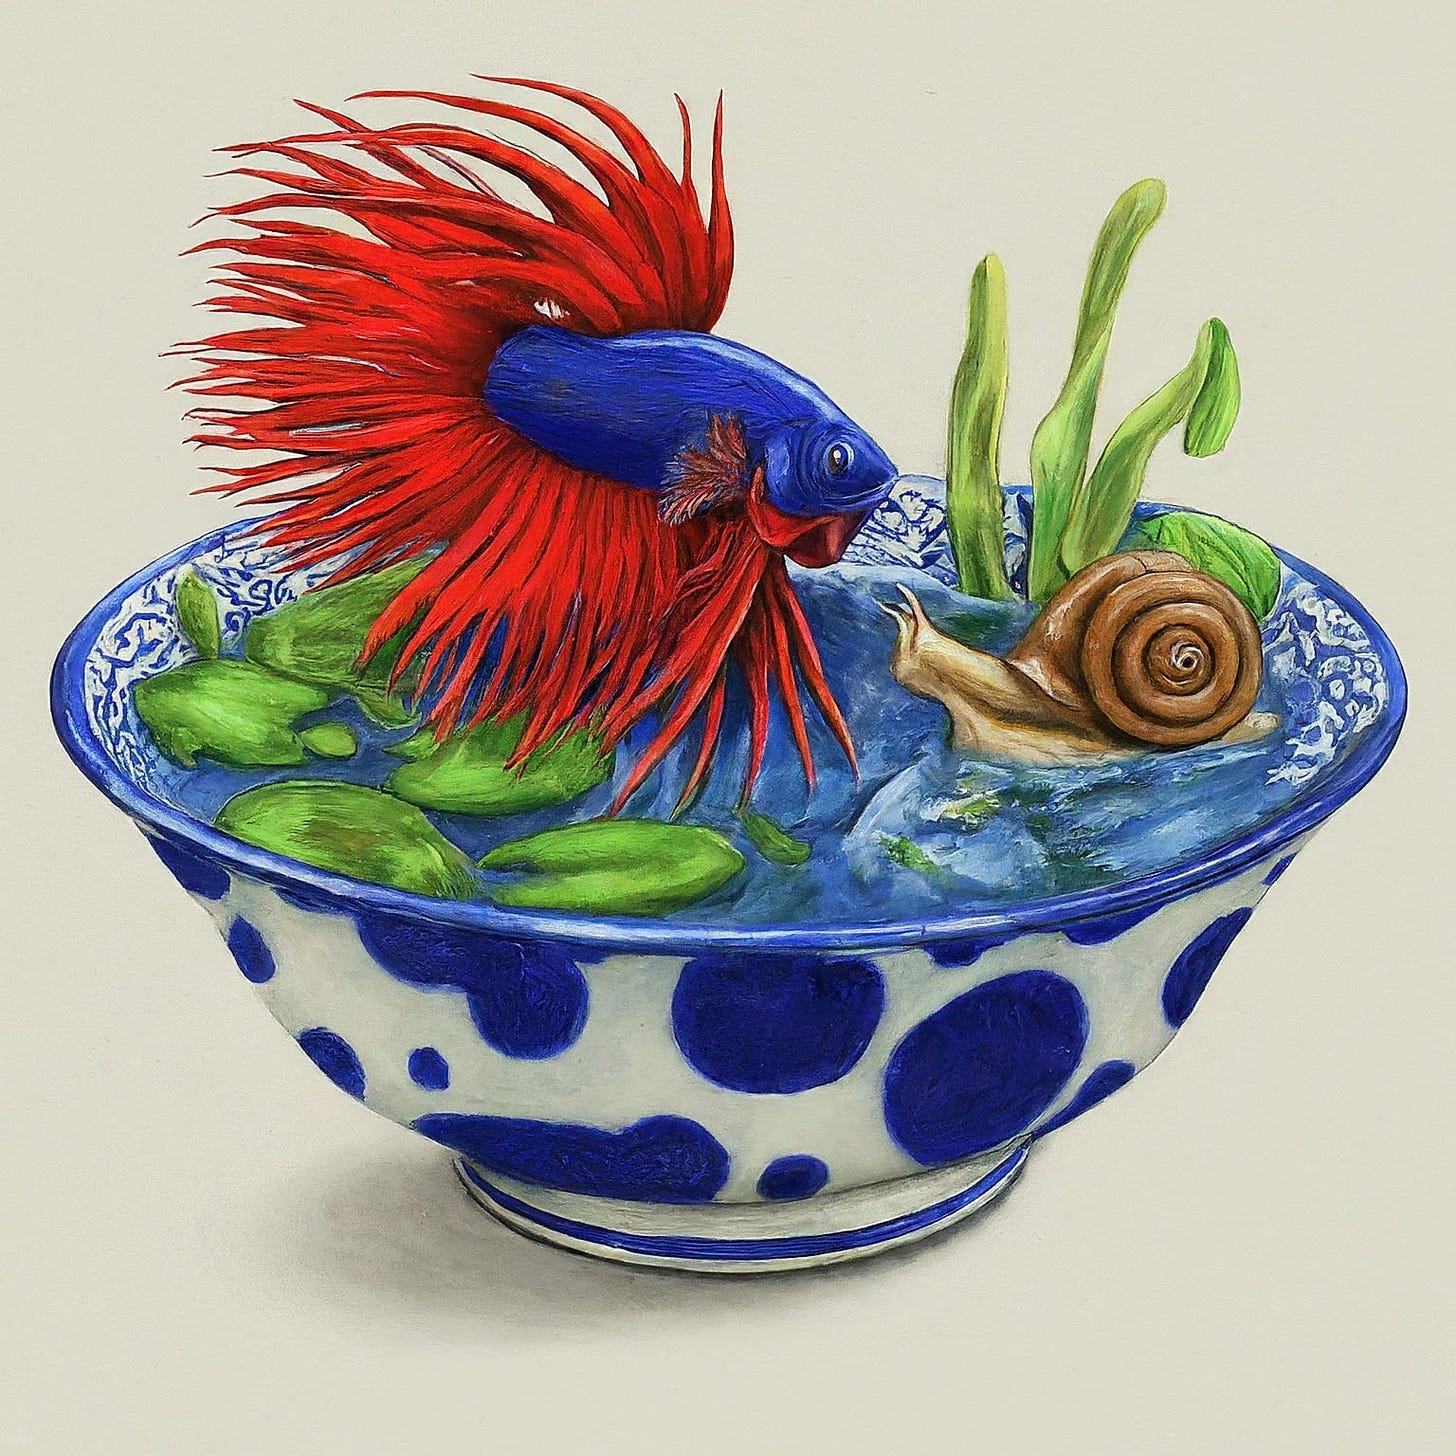 Gregory the betta fish